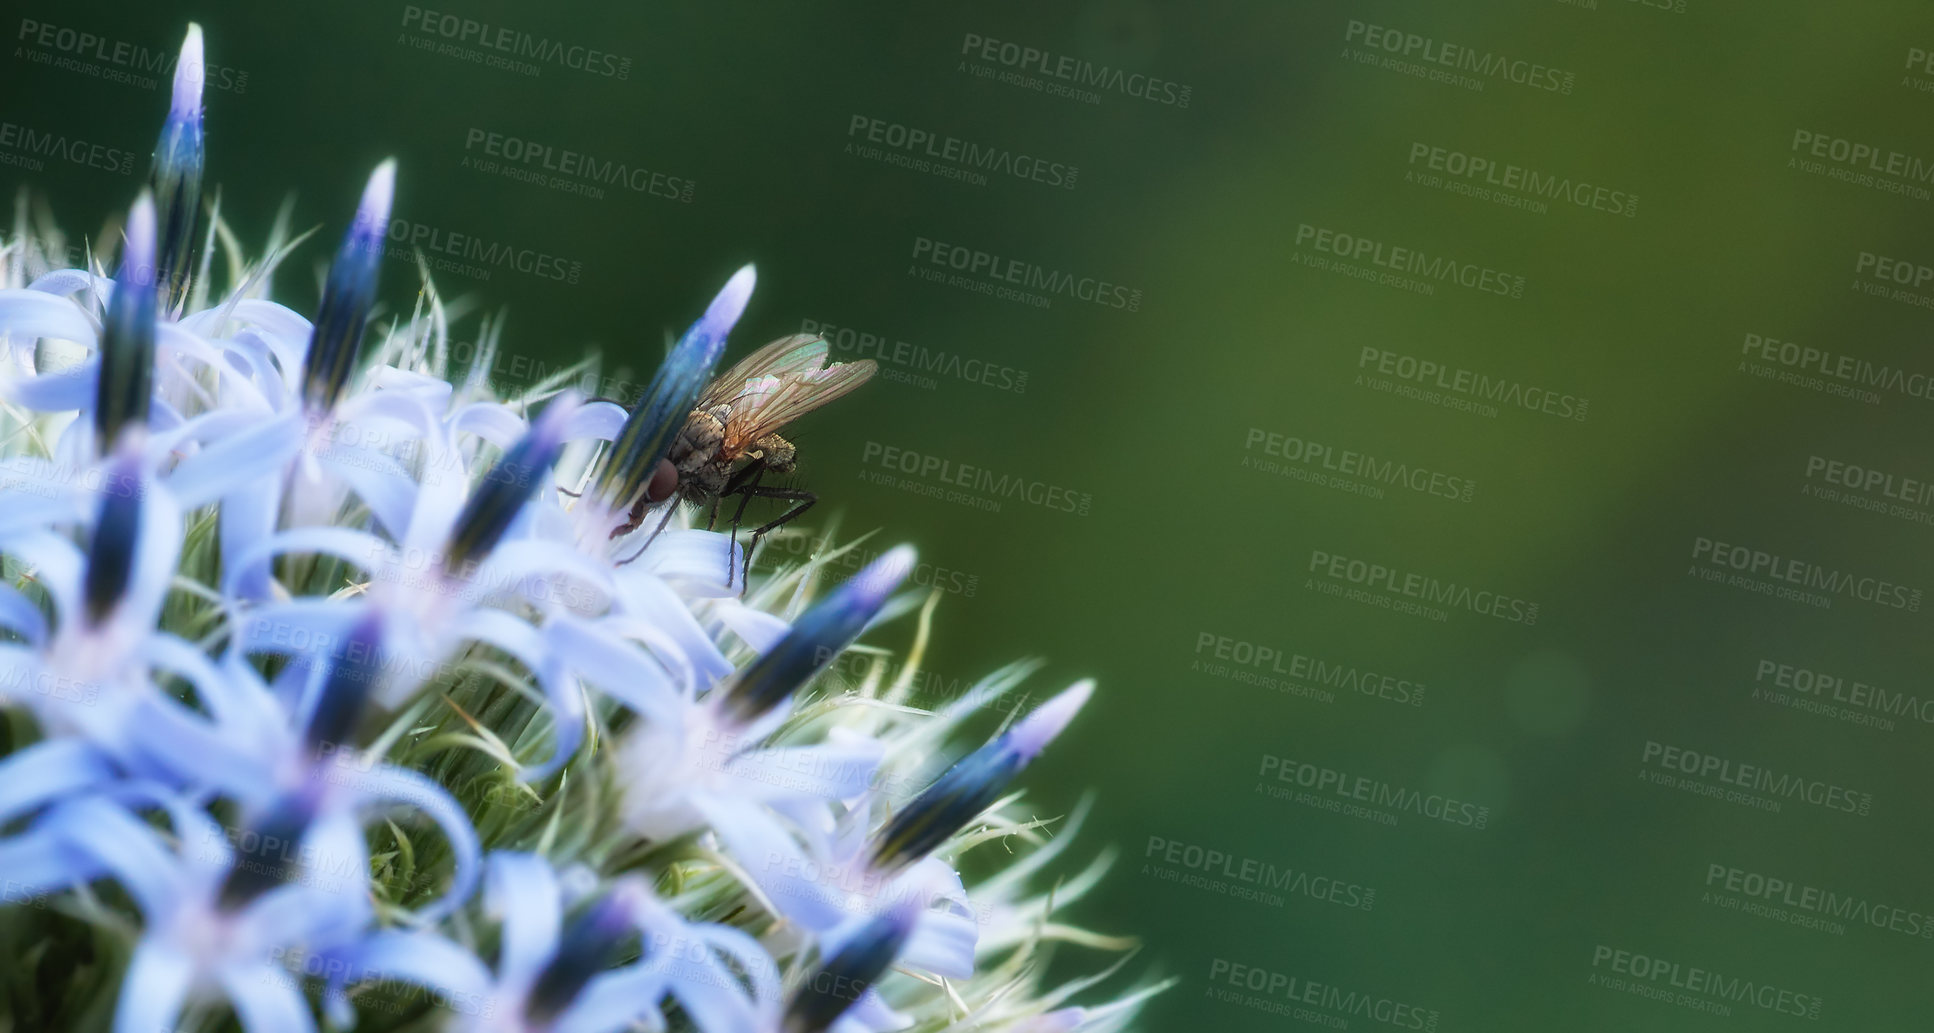 Buy stock photo Closeup of a delia antiqua fly feeding of blue globe thistle flower in private or secluded home garden. Textured detail of blossoming echinops, bokeh copy space background and insect or pest control